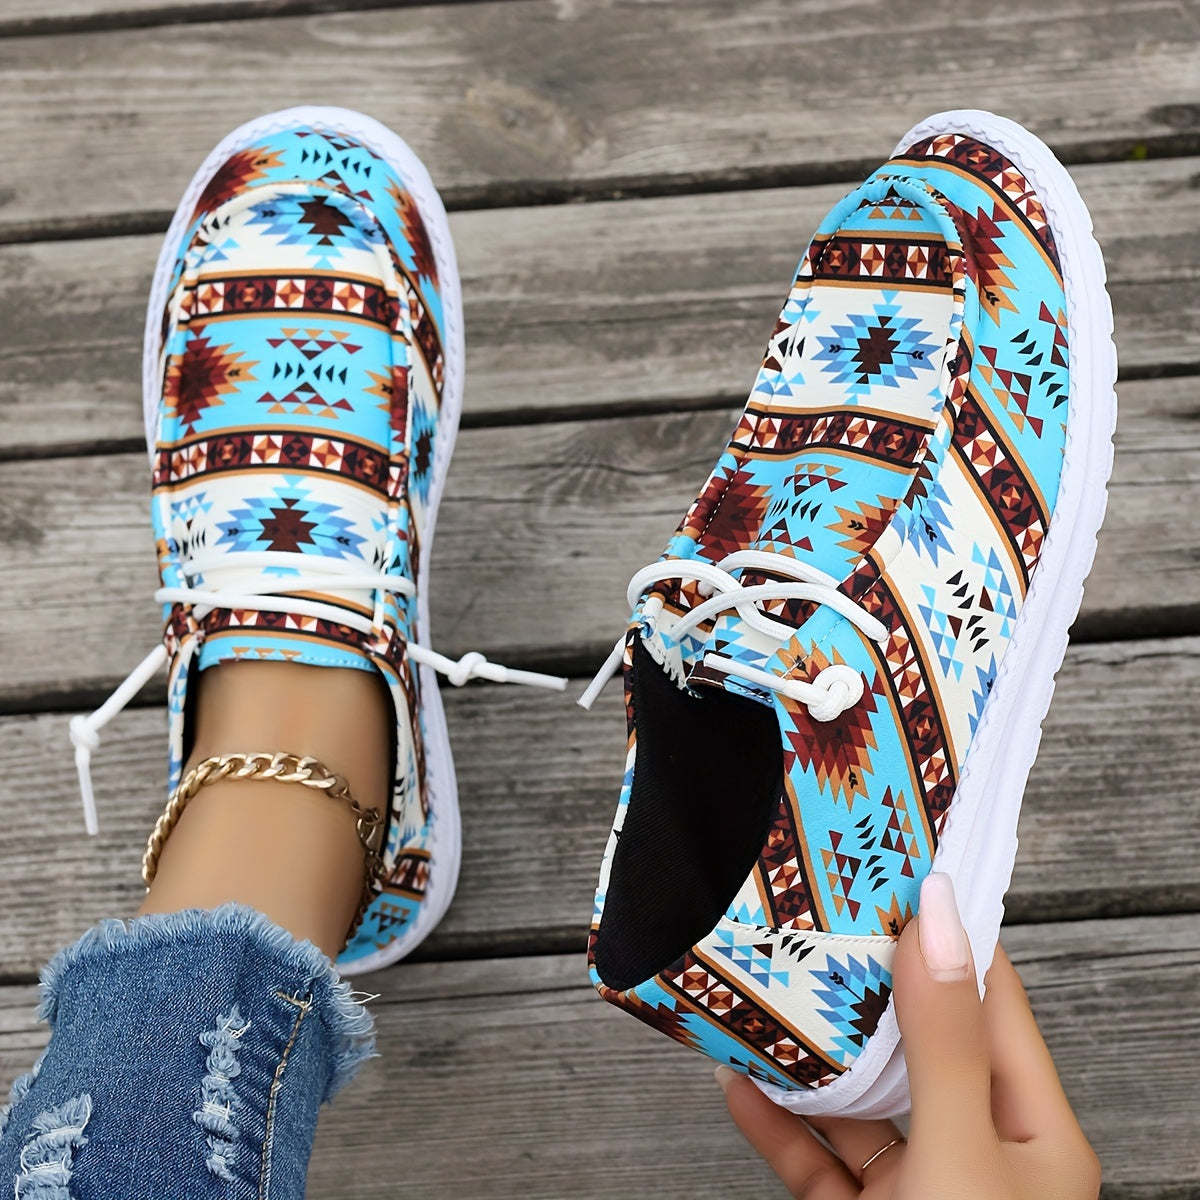 Geometric Pattern Canvas Shoes, Casual Lace Up Low Top Sneakers